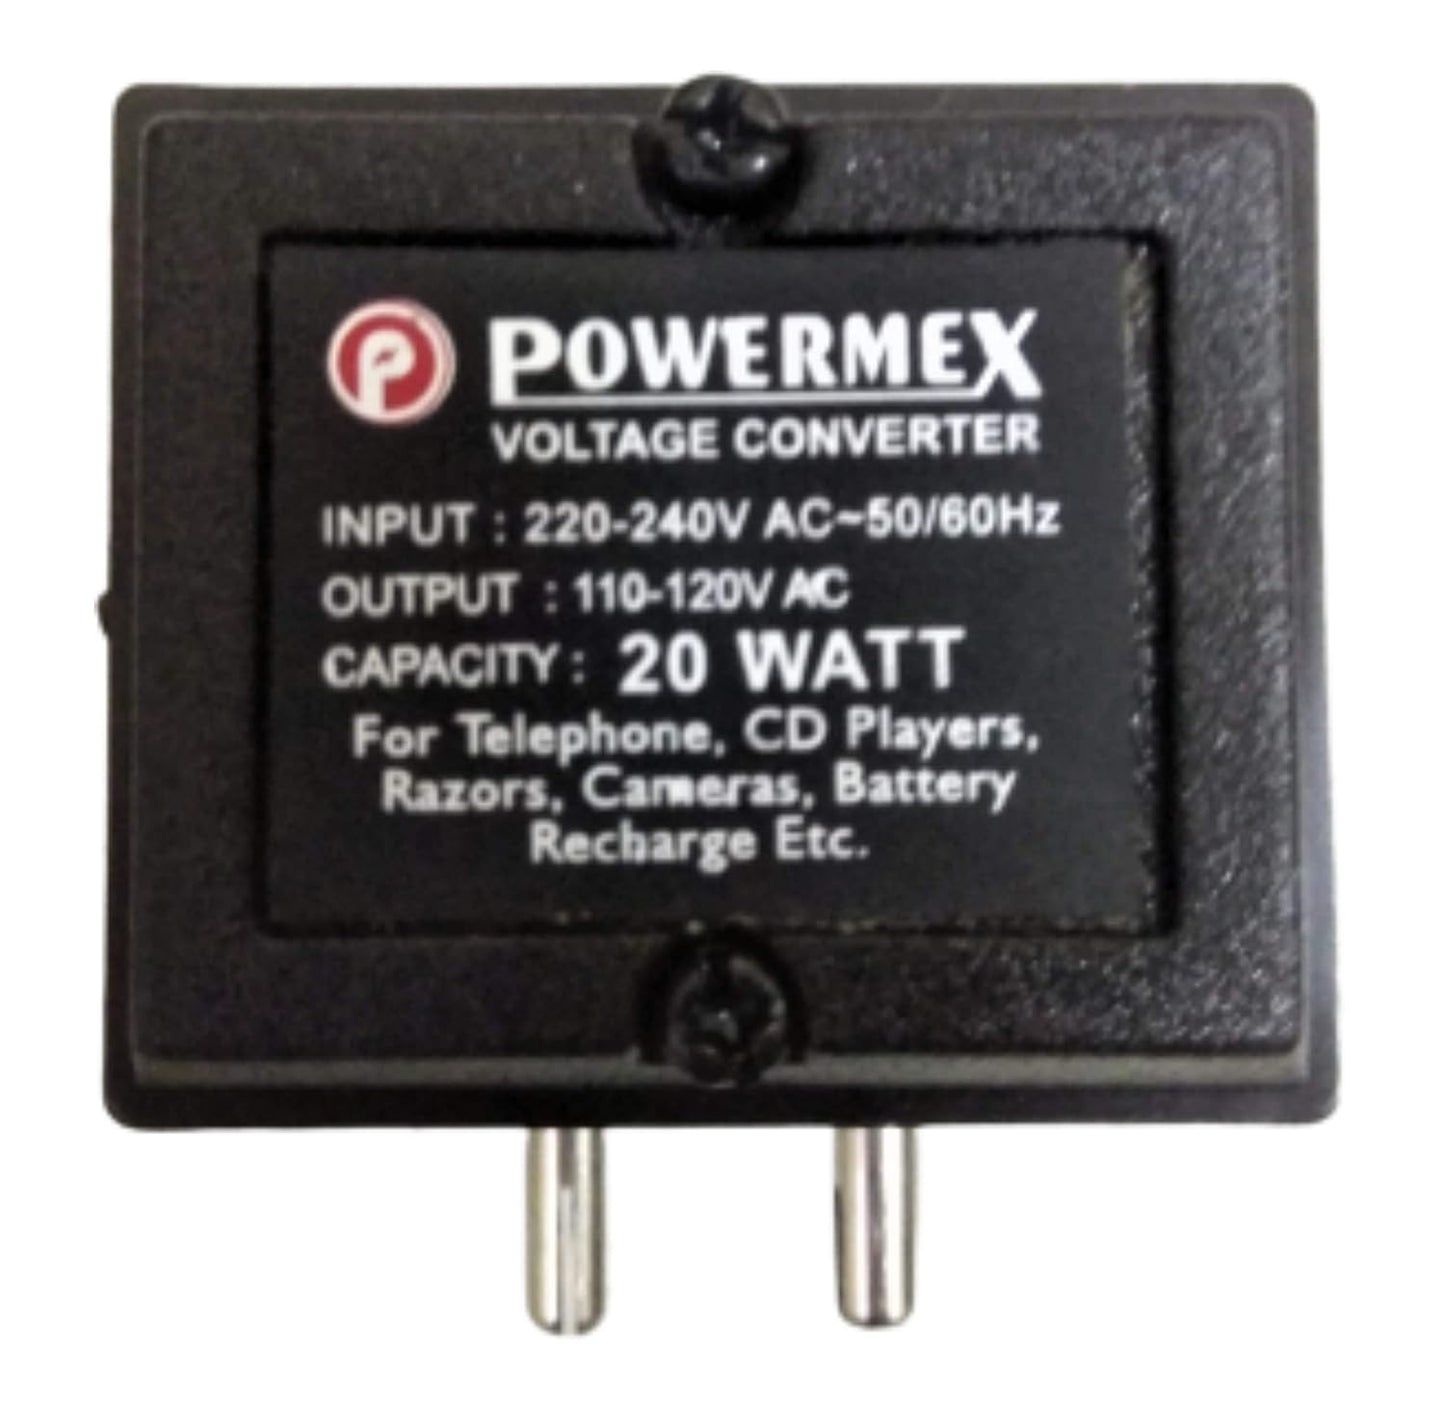 PATOYS | Voltage Converter 20w - 20 Watts - Converts AC 220V to AC 110V - Gives Sinusoidal Wave Form - with Universal Socket Charger PATOYS